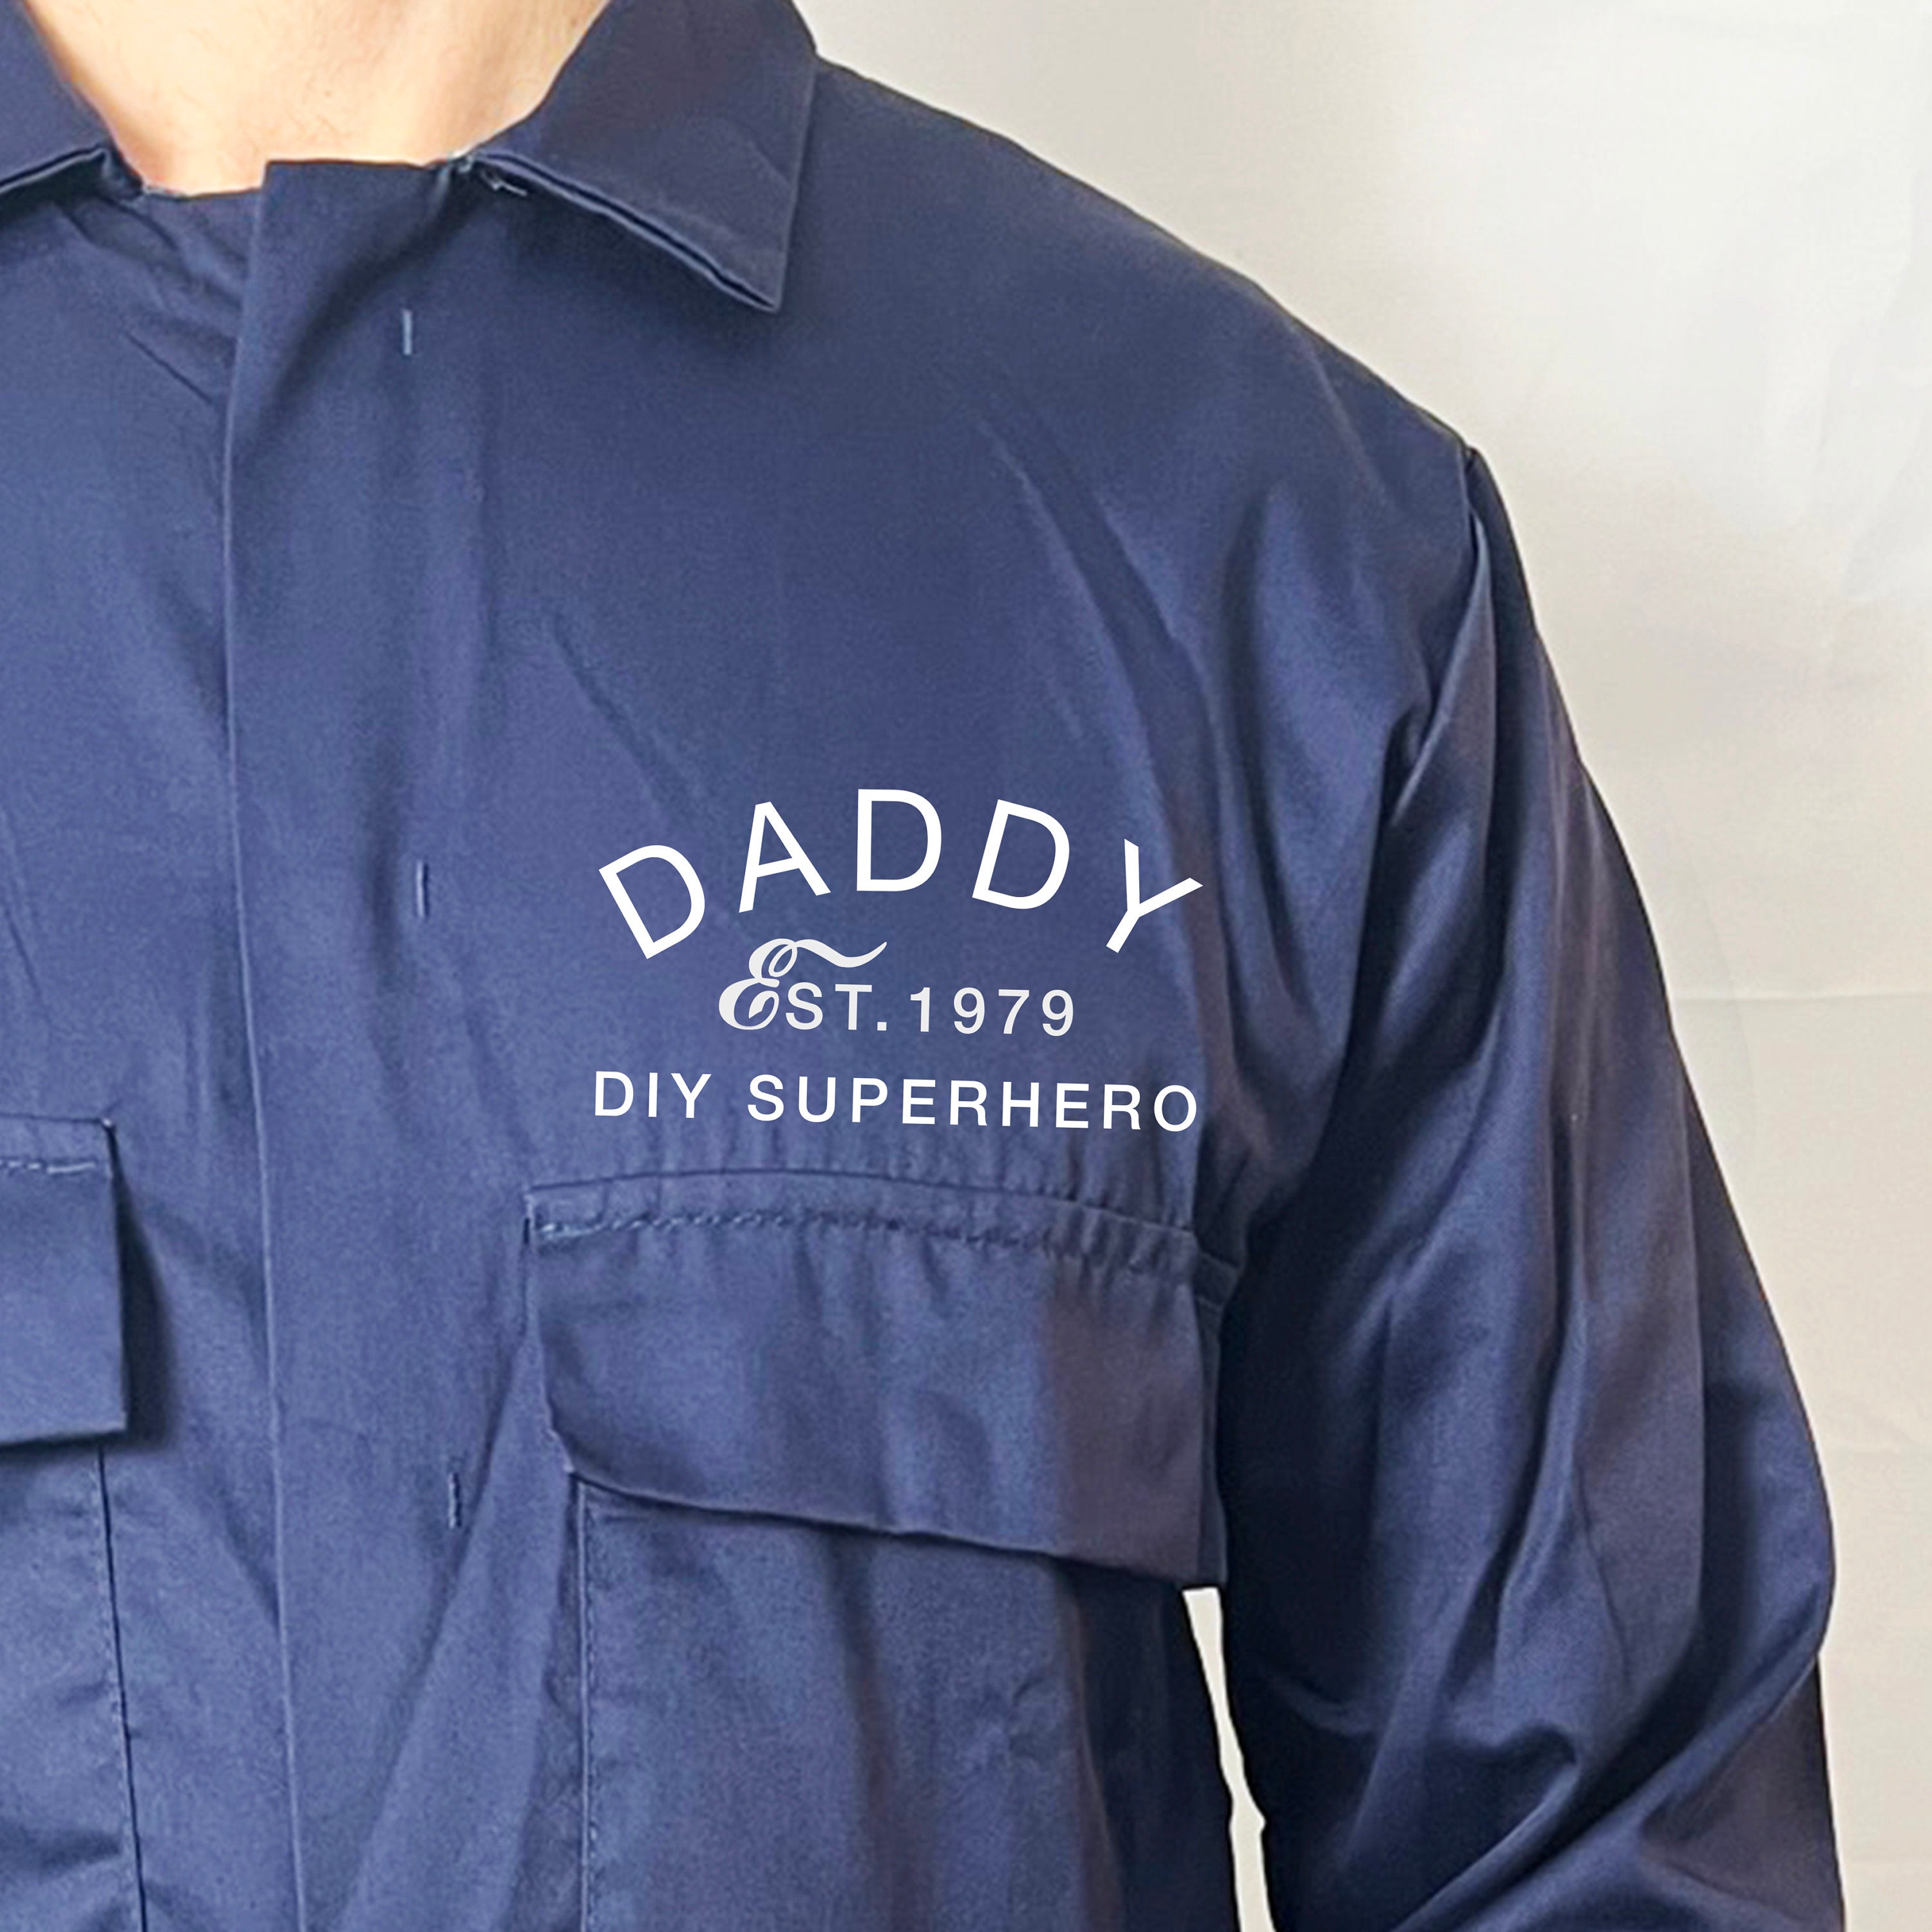 Personalised Overalls - DIY Overalls - Personalised Coveralls - DIY Gift for Him - Boiler suit - Father's Day Gift - Dad tools Present